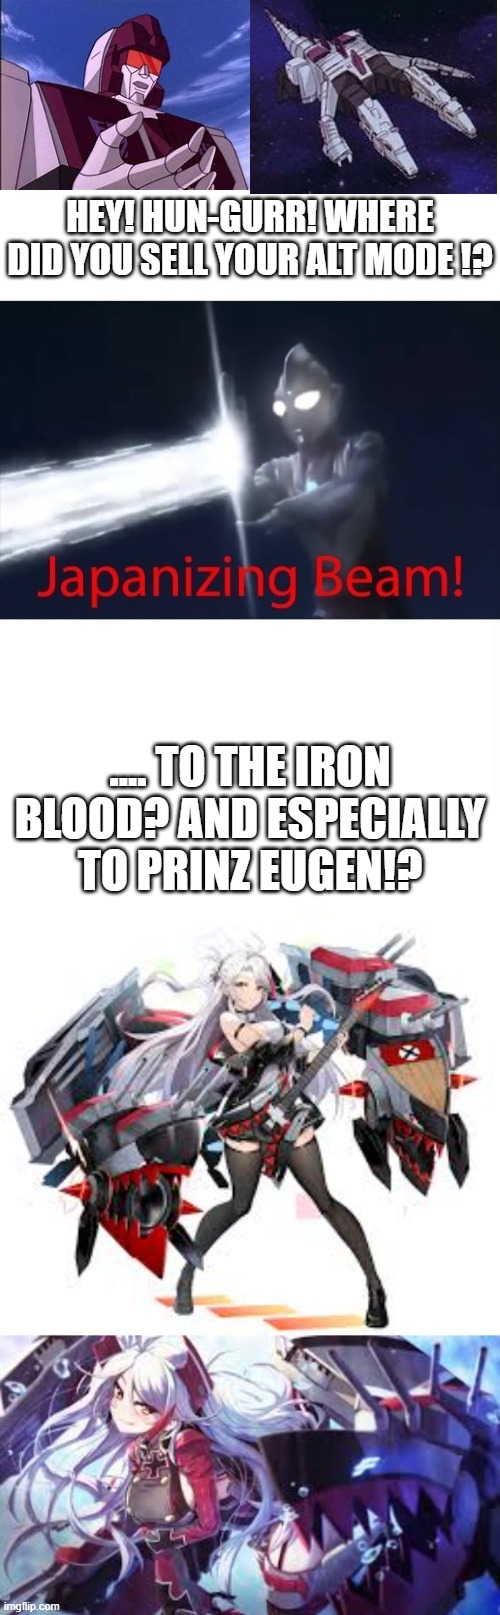 when hun-gurr is broken and is forced to work an odd job | HEY! HUN-GURR! WHERE DID YOU SELL YOUR ALT MODE !? .... TO THE IRON BLOOD? AND ESPECIALLY TO PRINZ EUGEN!? | image tagged in japanizing beam,azur lane,transformers | made w/ Imgflip meme maker